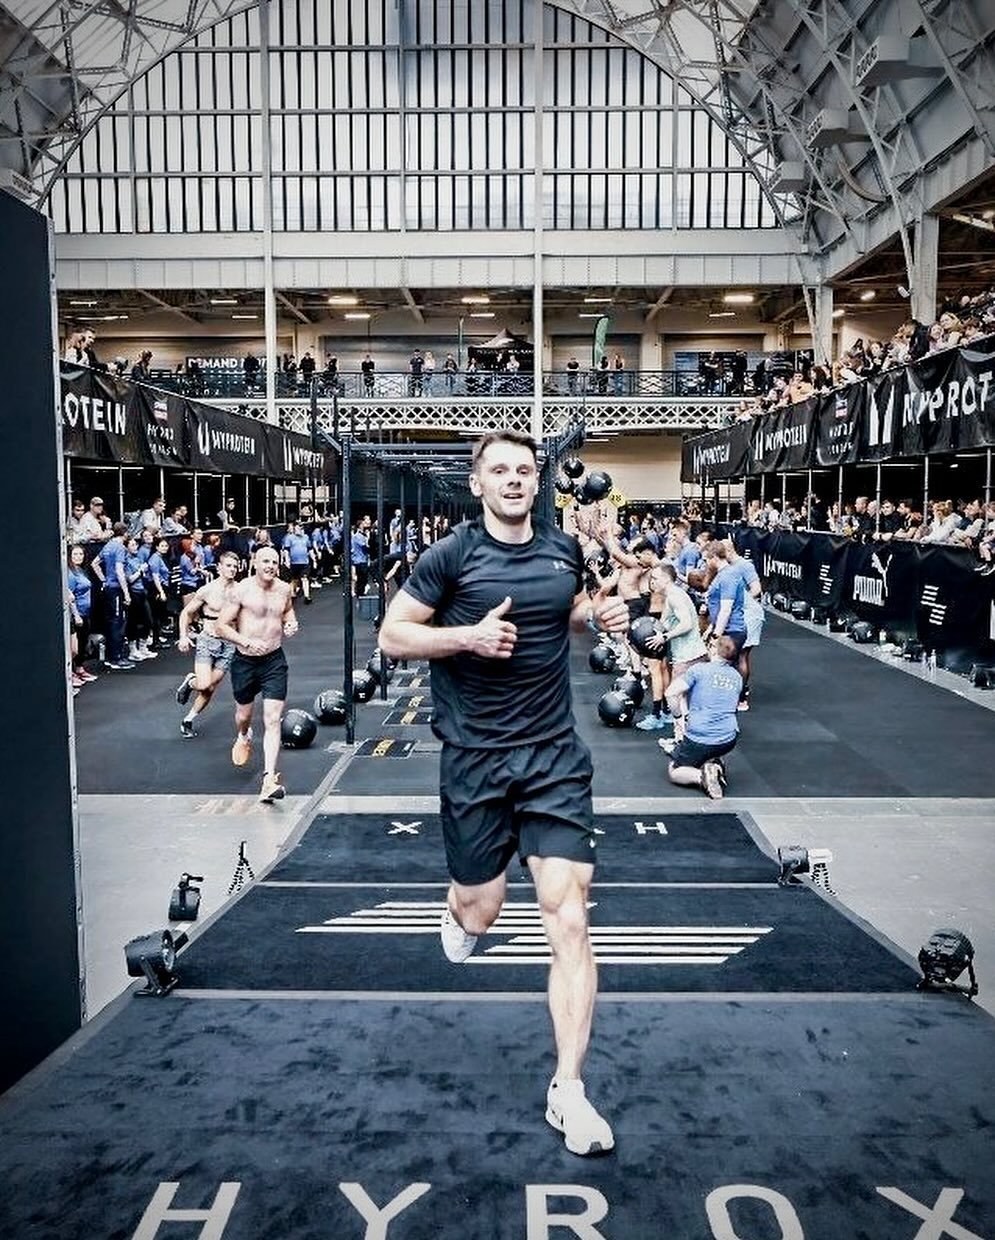 🎉 Huge congratulations to our Battle Bootcamp members who absolutely smashed London Hyrox this weekend! 🏆 Your dedication, strength, and relentless spirit led to incredible performances. 💪🔥

🏋️&zwj;♂️ You&rsquo;ve proven that hard work pays off,